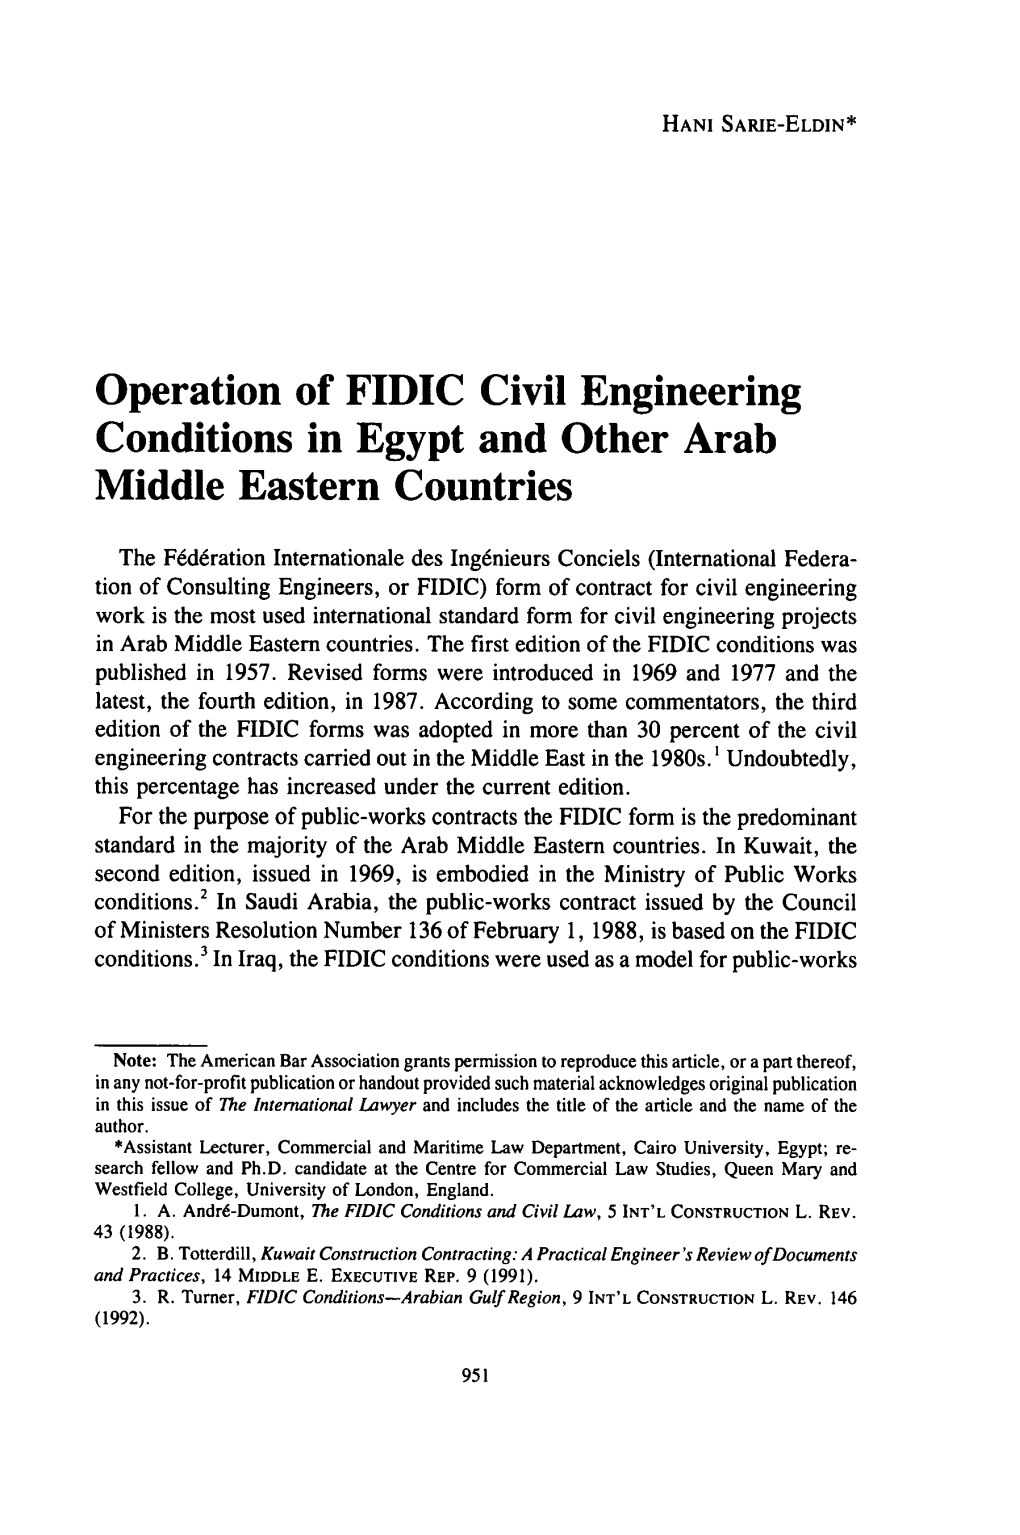 Operation of FIDIC Civil Engineering Conditions in Egypt and Other Arab Middle Eastern Countries